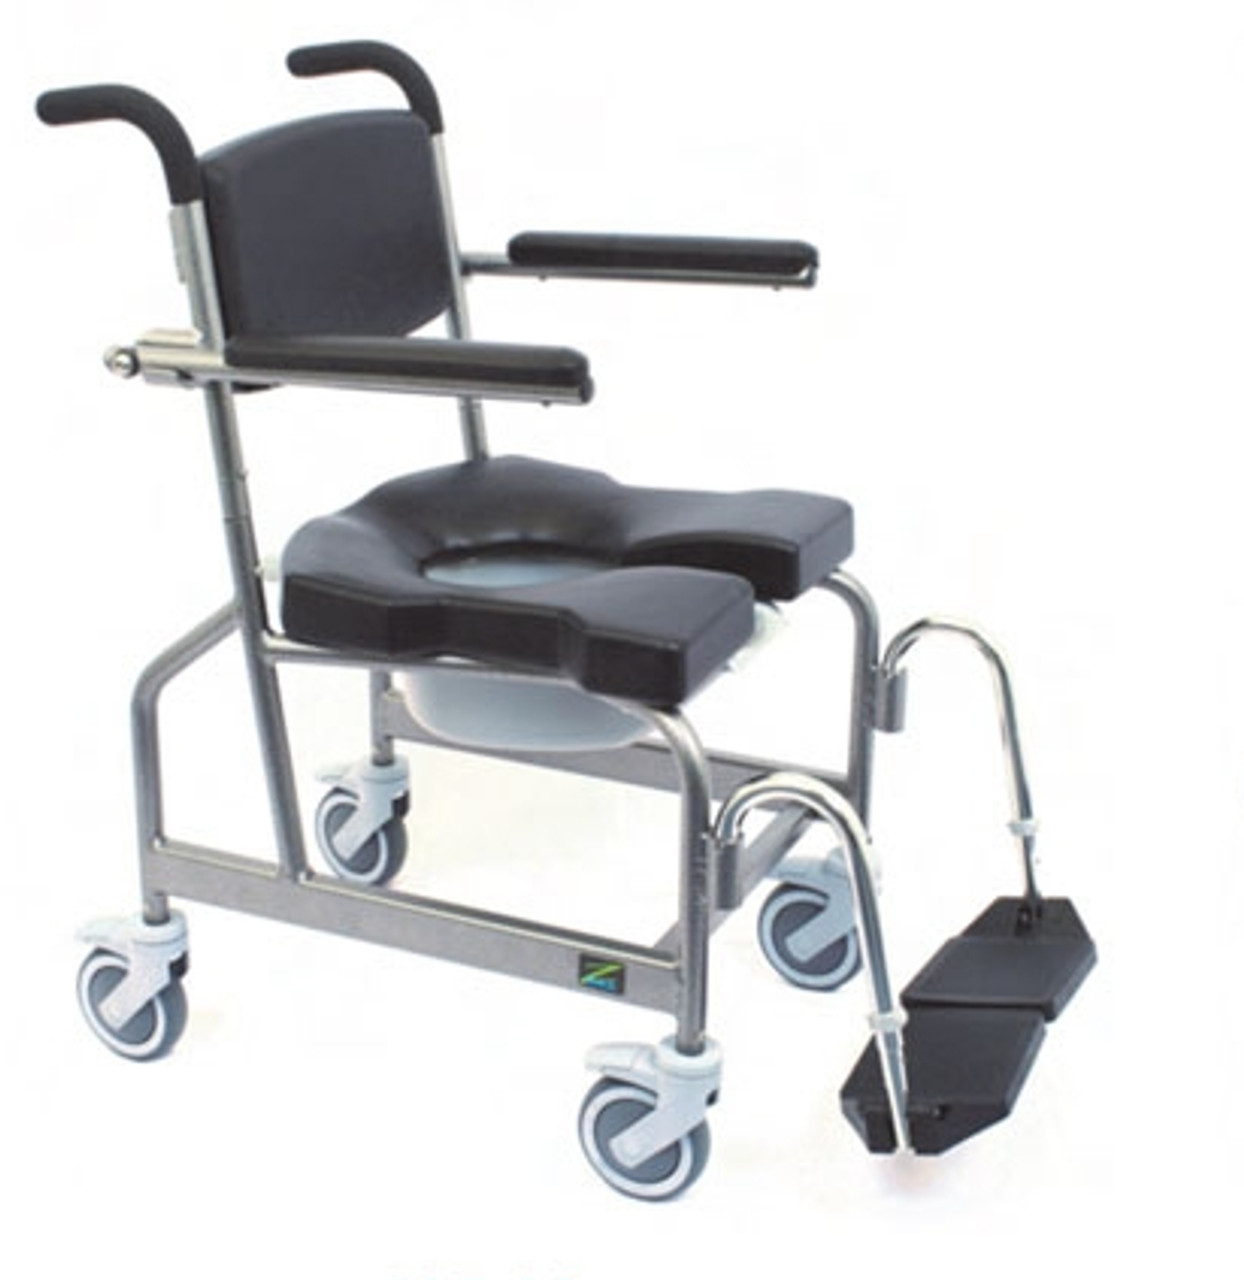 Invacare - Seat Replacement for Rehab Shower/Commode Chair